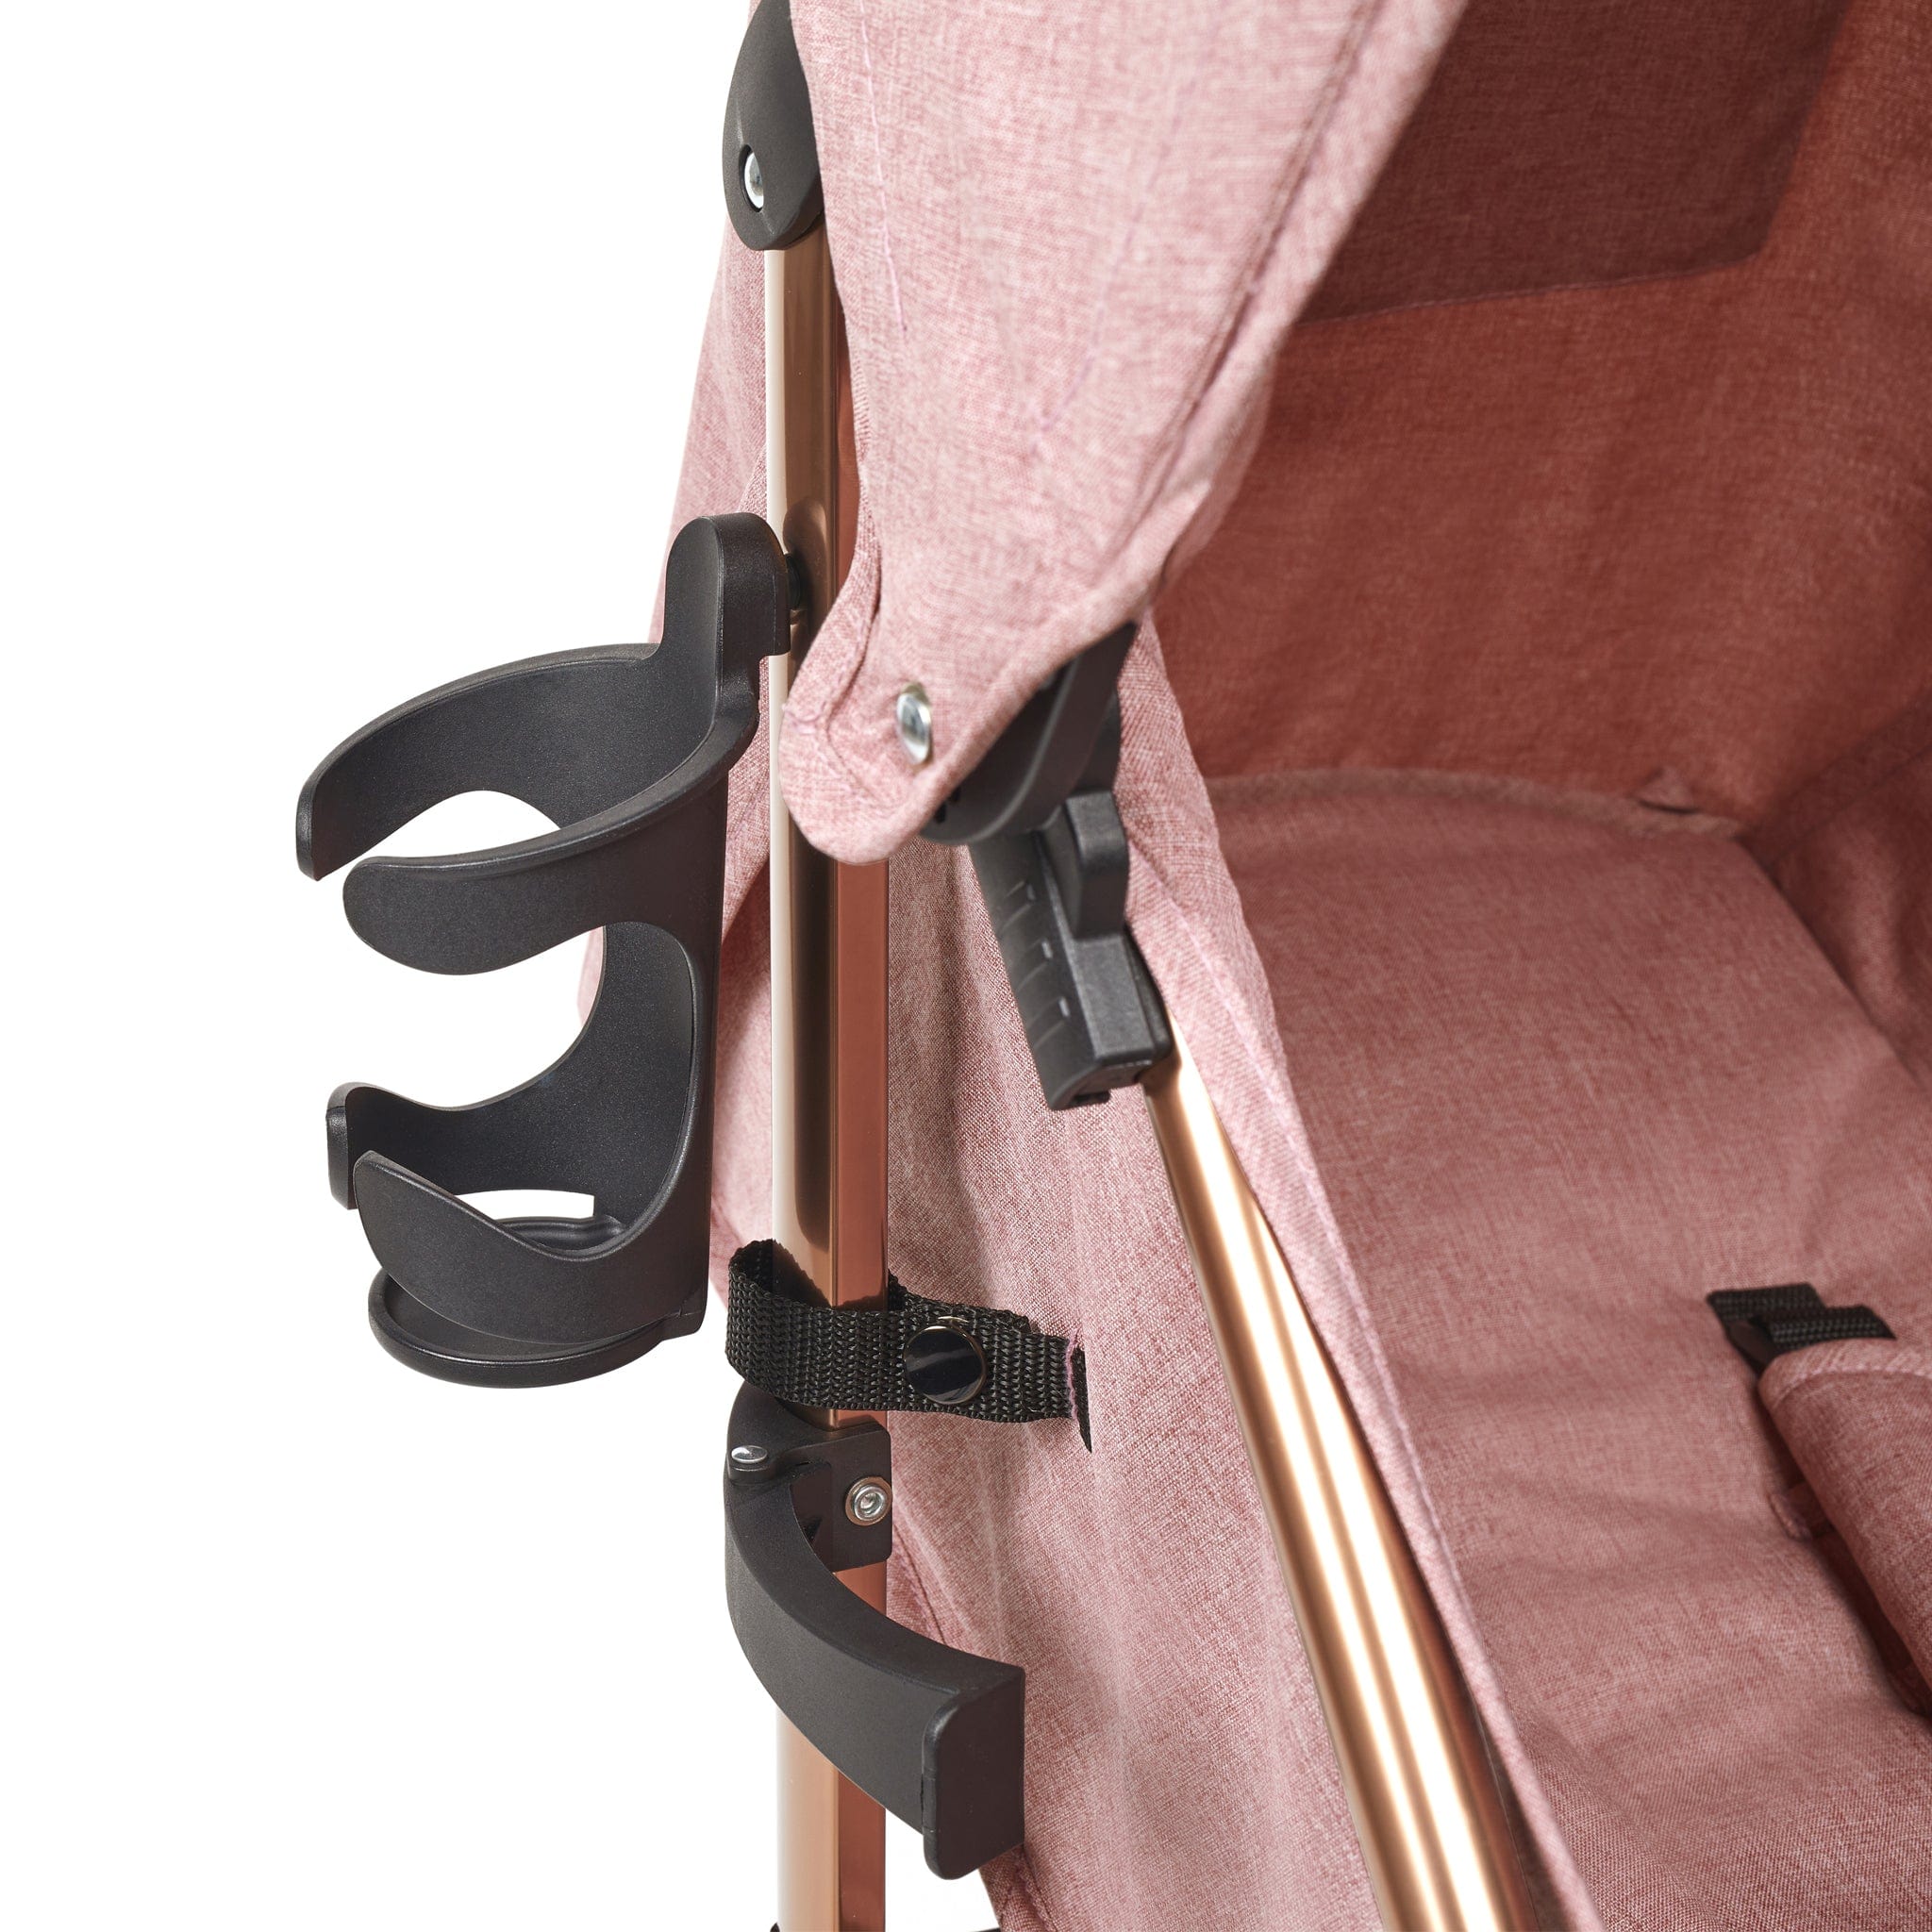 Ickle Bubba baby pushchairs Ickle Bubba Discovery Max Pushchair Dusky Pink/Rose Gold 15-002-200-121